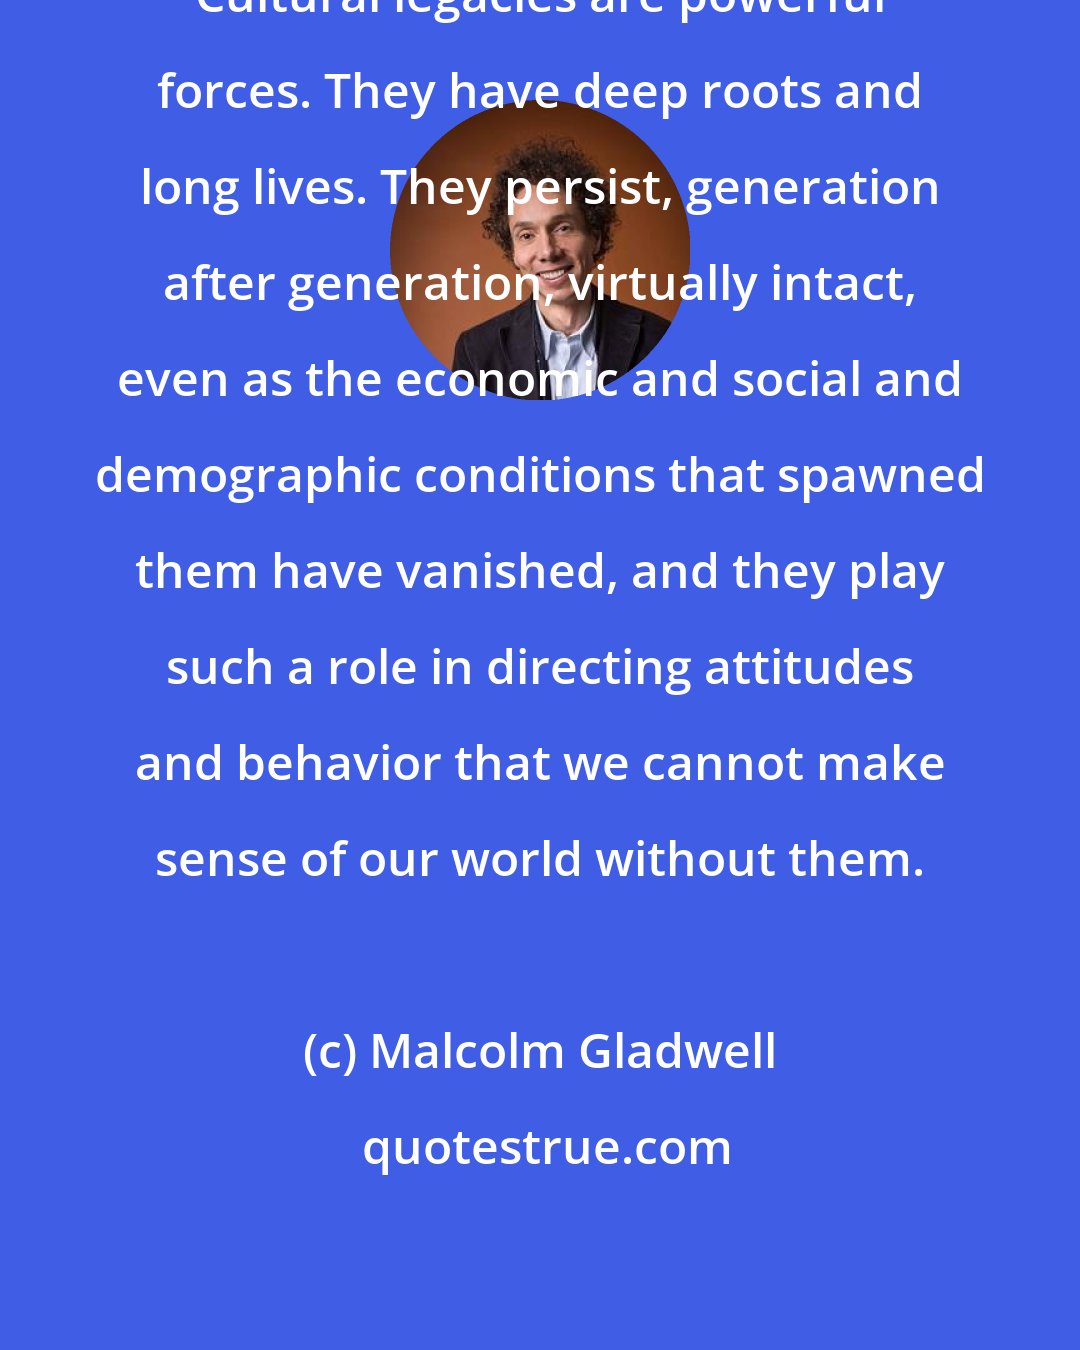 Malcolm Gladwell: Cultural legacies are powerful forces. They have deep roots and long lives. They persist, generation after generation, virtually intact, even as the economic and social and demographic conditions that spawned them have vanished, and they play such a role in directing attitudes and behavior that we cannot make sense of our world without them.